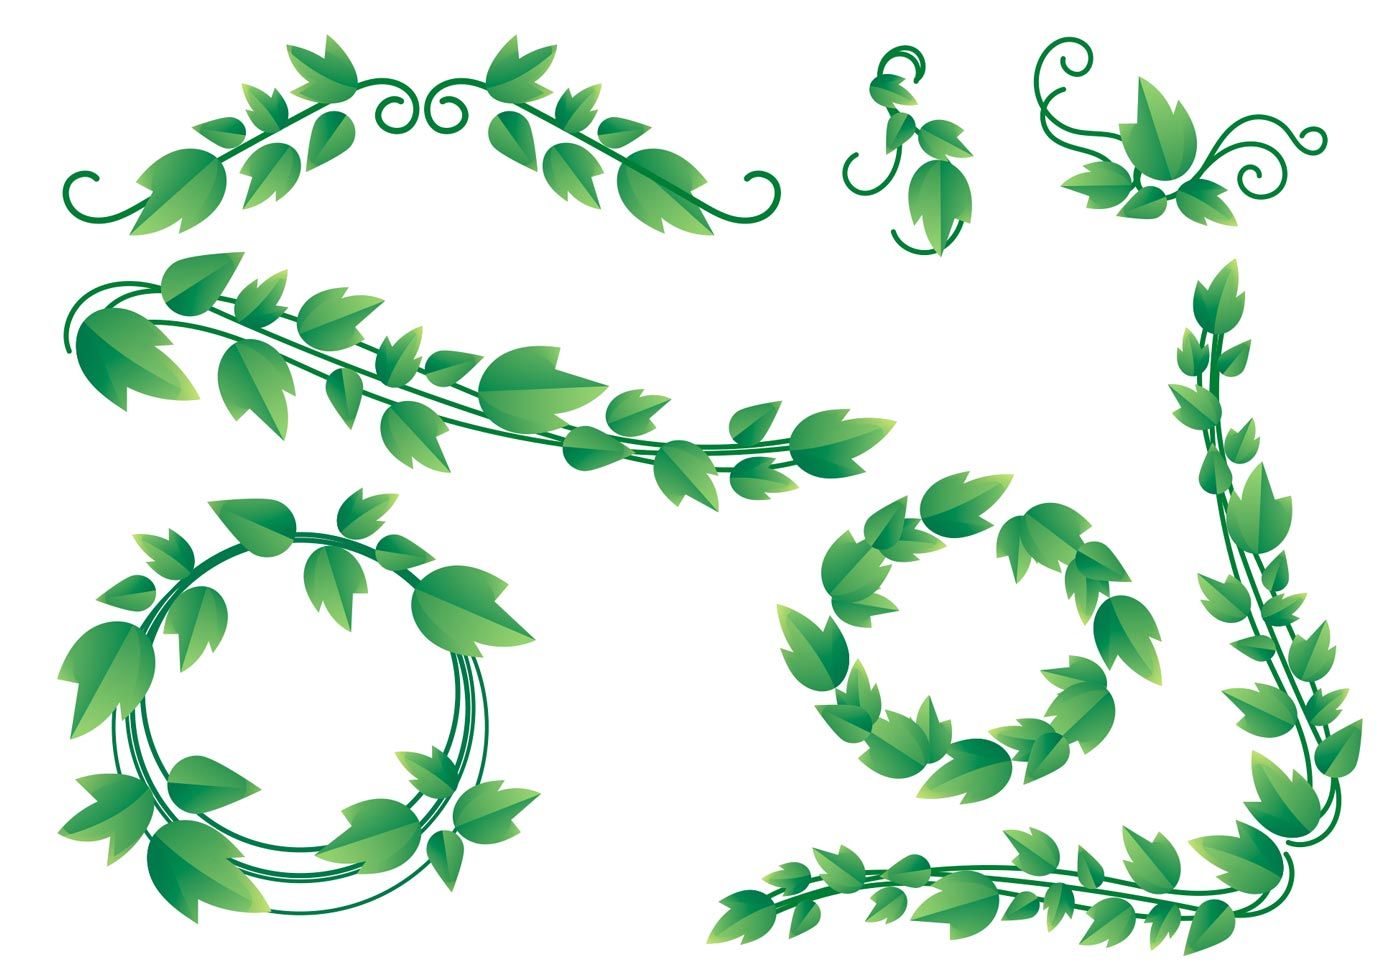 Rendered vine borders and. Ivy clipart curved branch